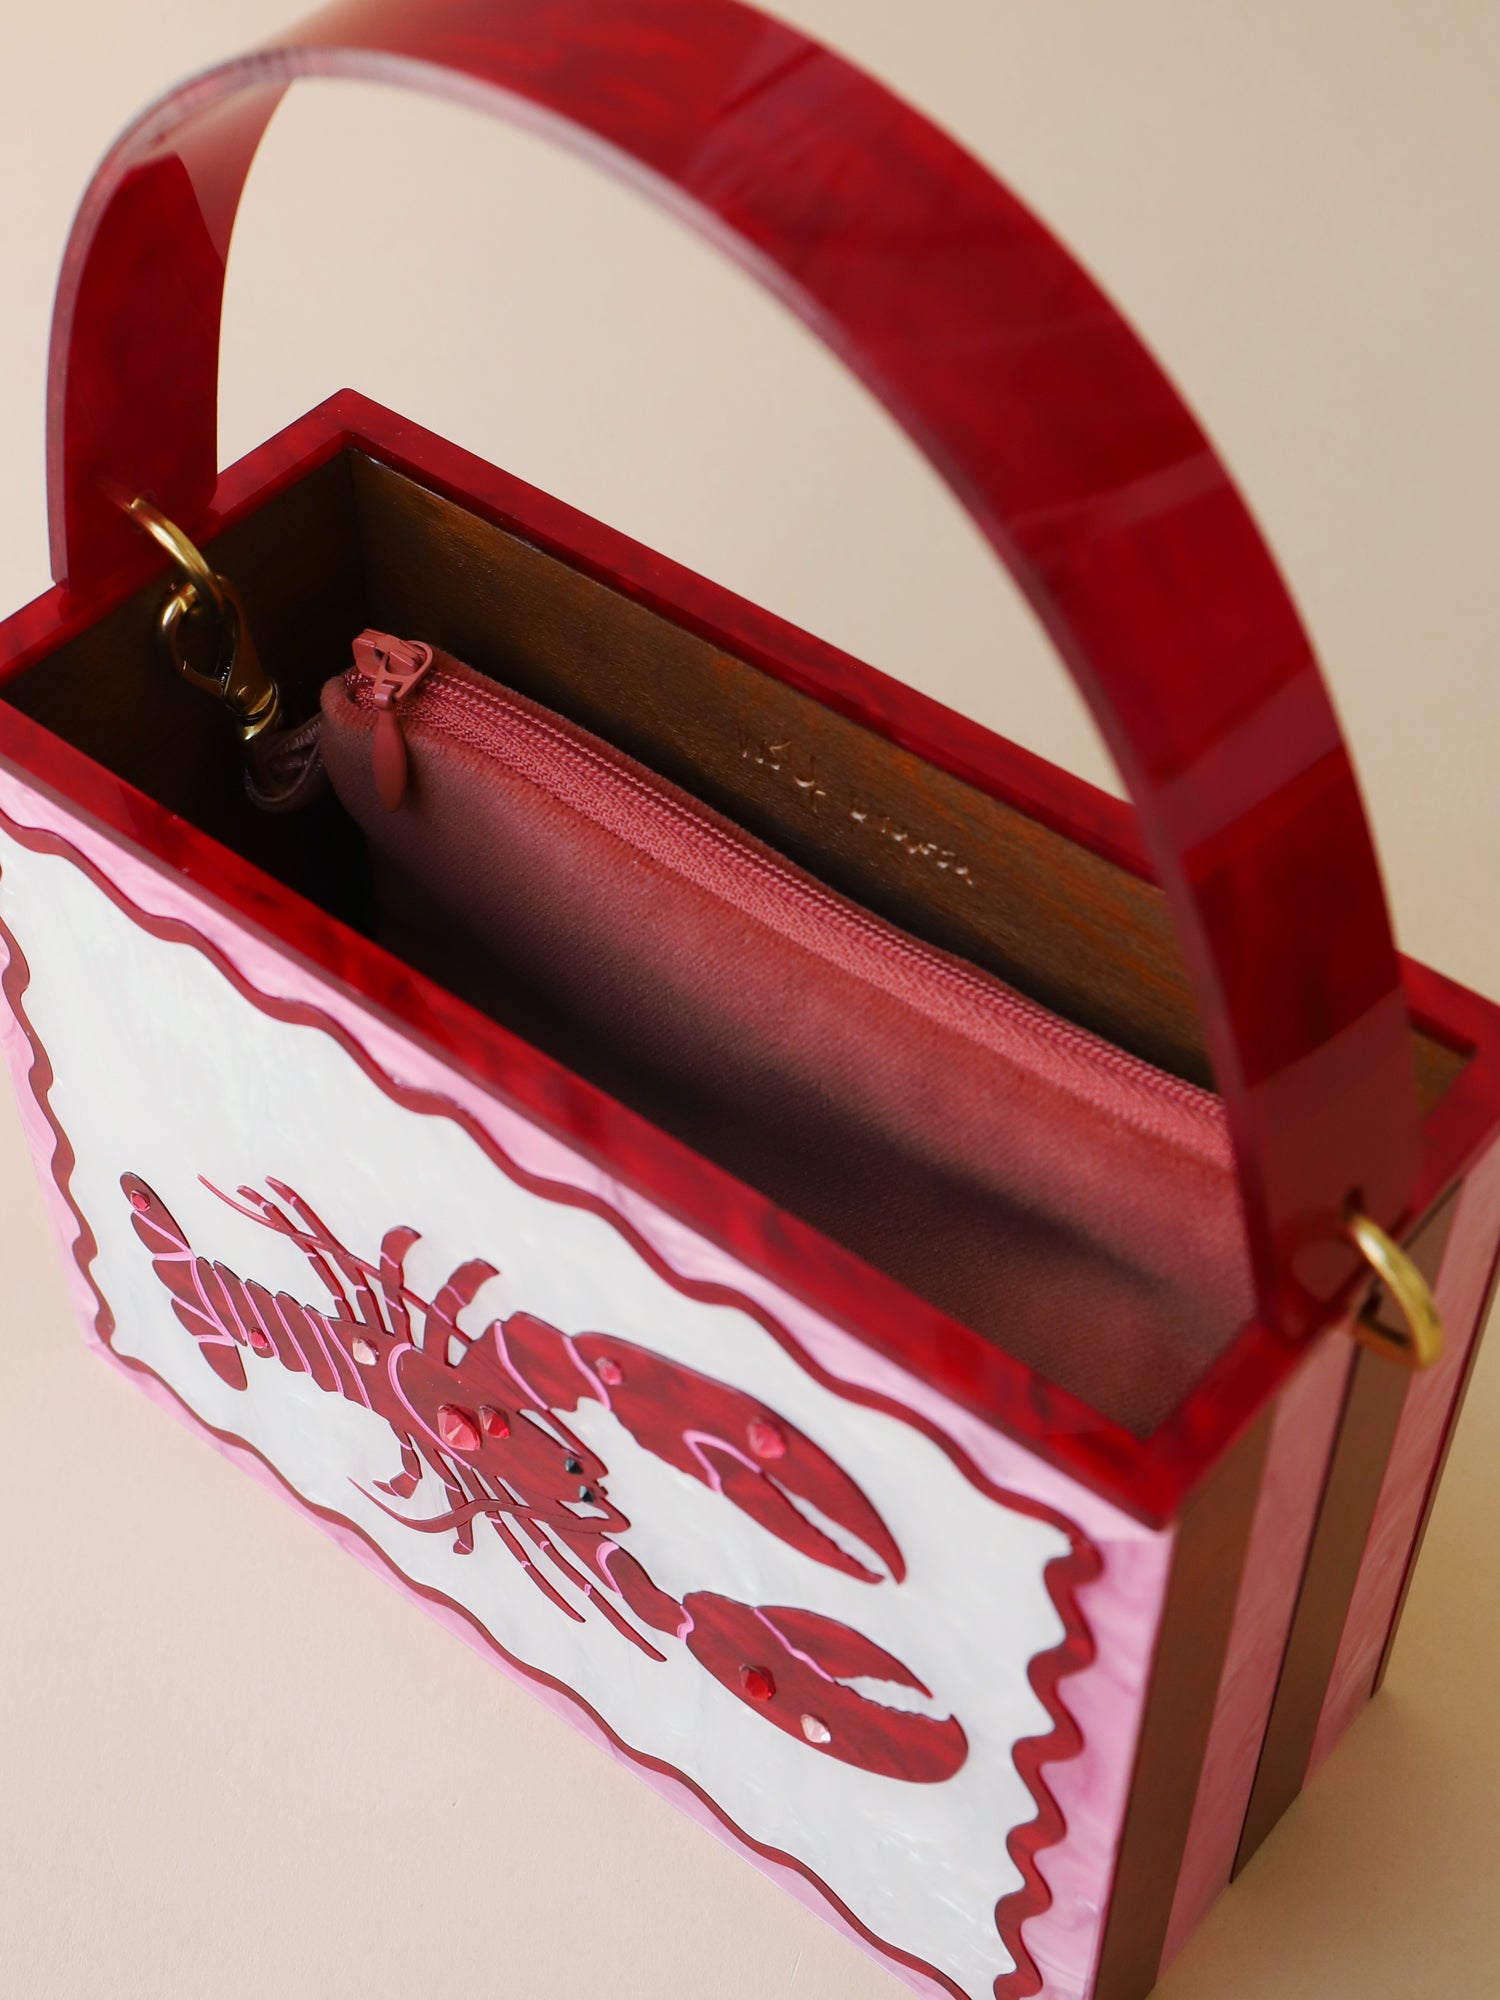 Red & pink lobster bag. Made from acrylic and wood. Handmade in the UK by Wolf & Moon. 